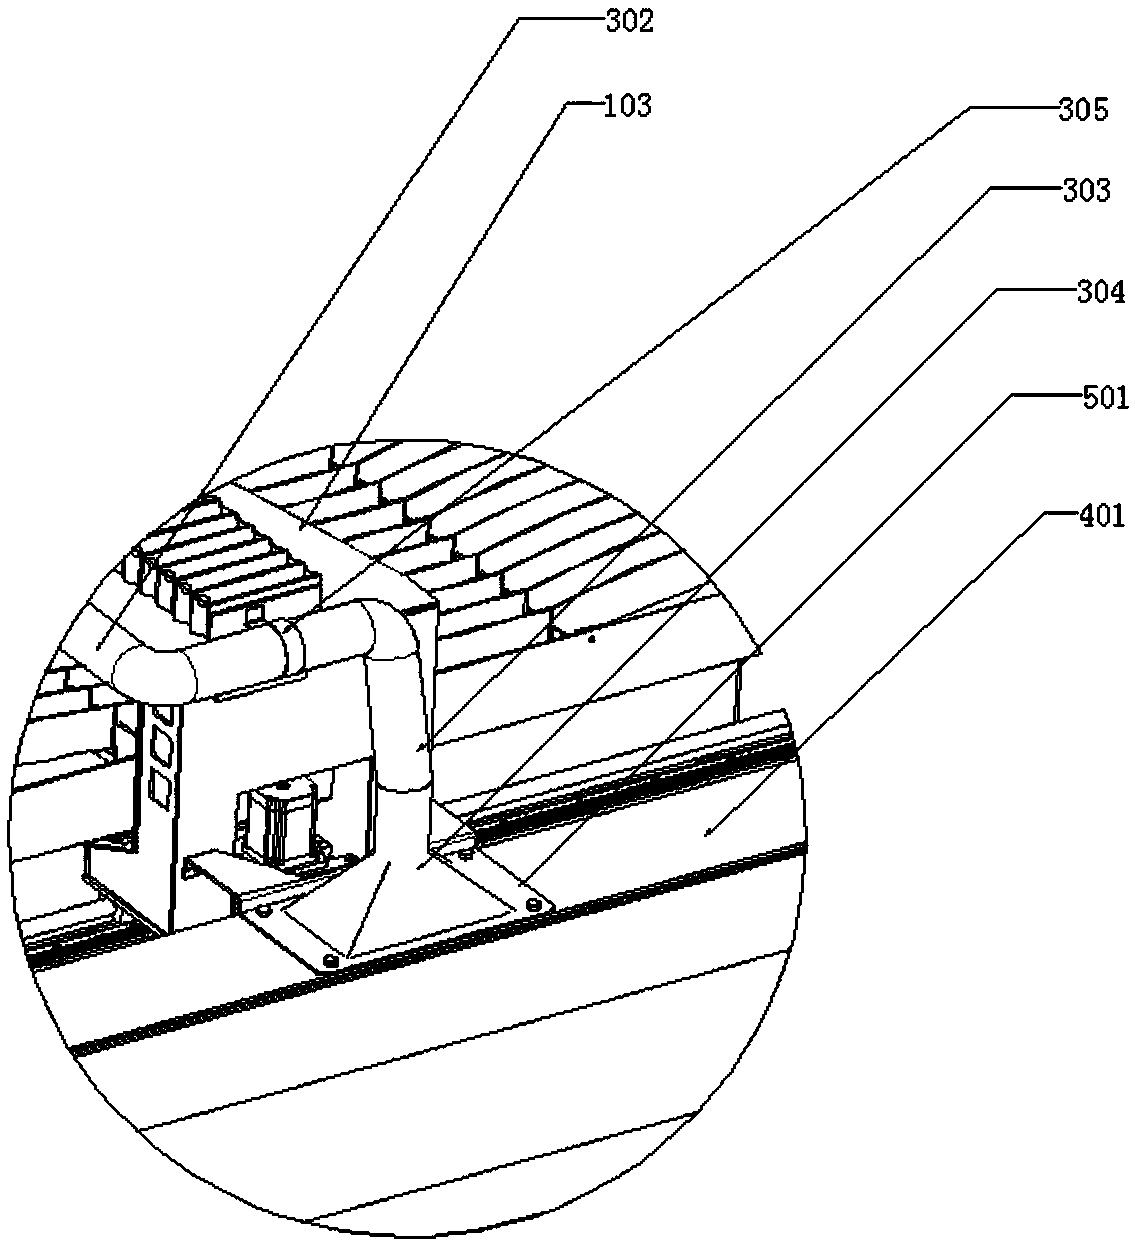 Dust removing device dedicated to computer numerical control cutter